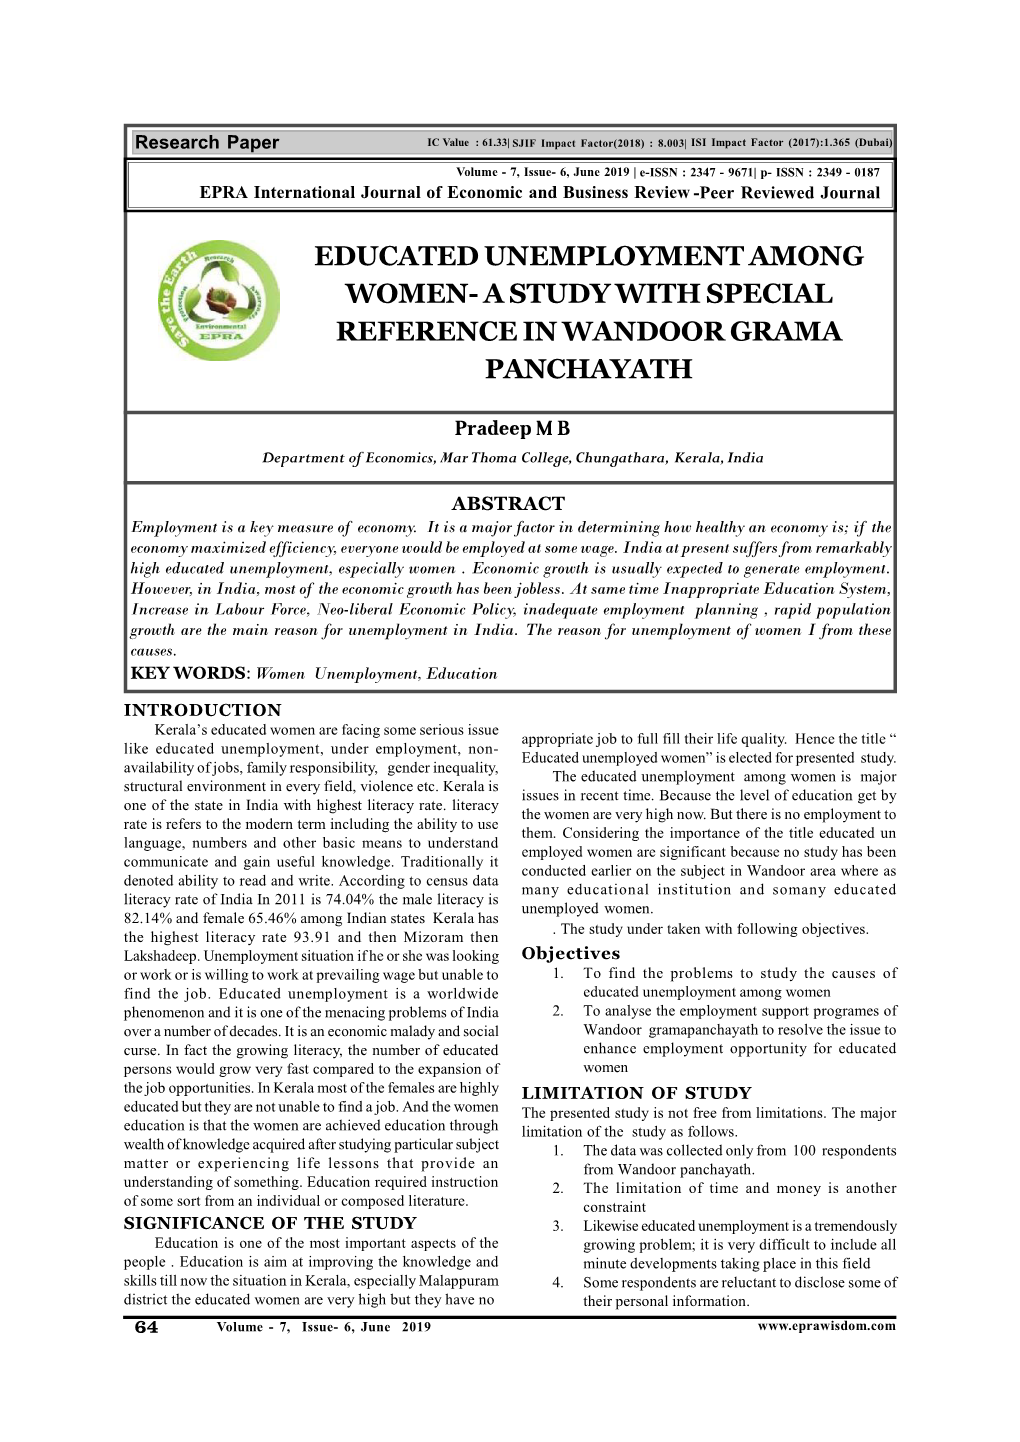 Educated Unemployment Among Women- a Study with Special Reference in Wandoor Grama Panchayath